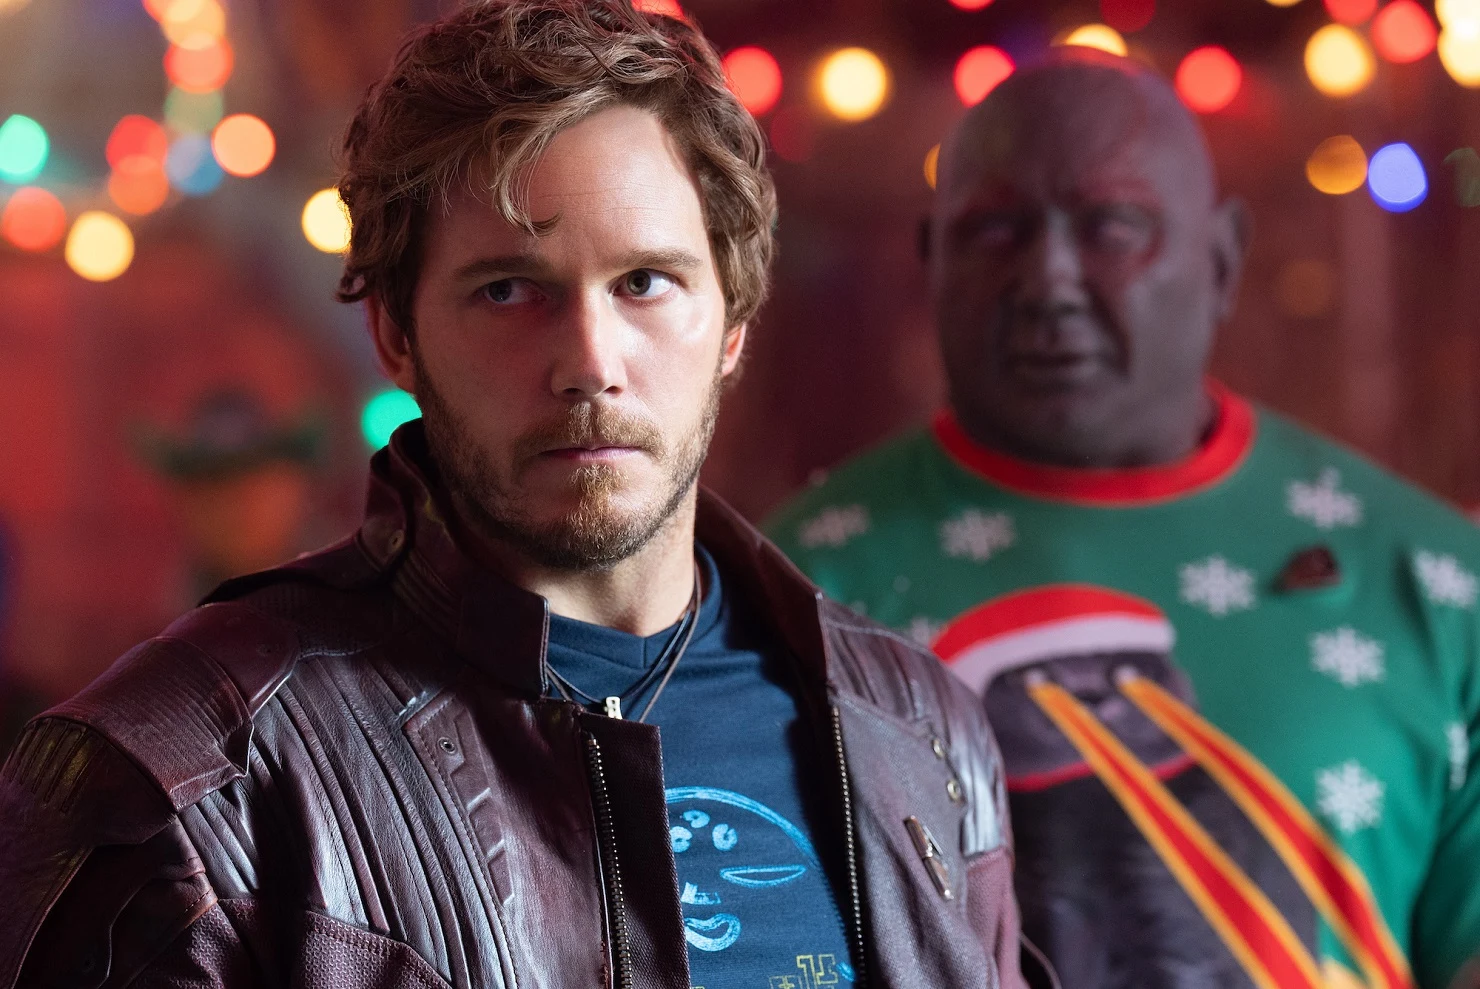 peter quill's sister confirmed in guardians of the galaxy holiday special